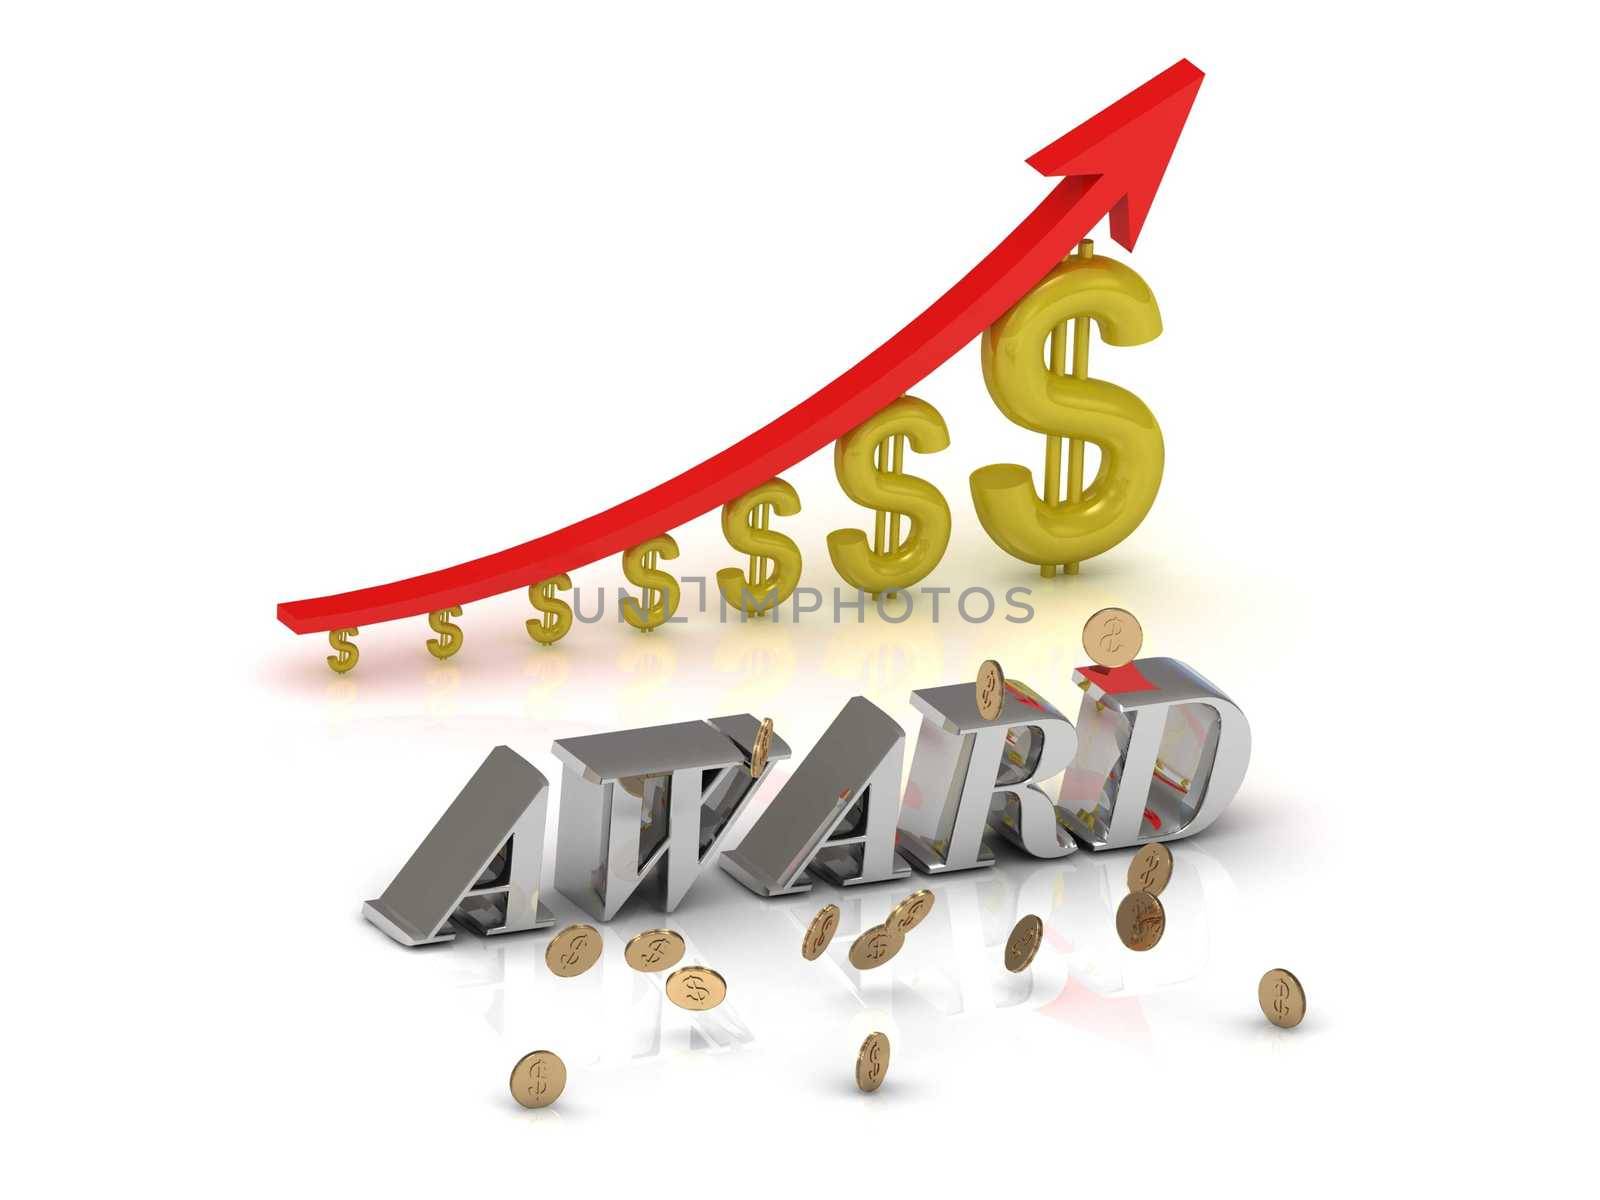 AWARD bright silver letters and graphic growing dollars and red arrow on a white background